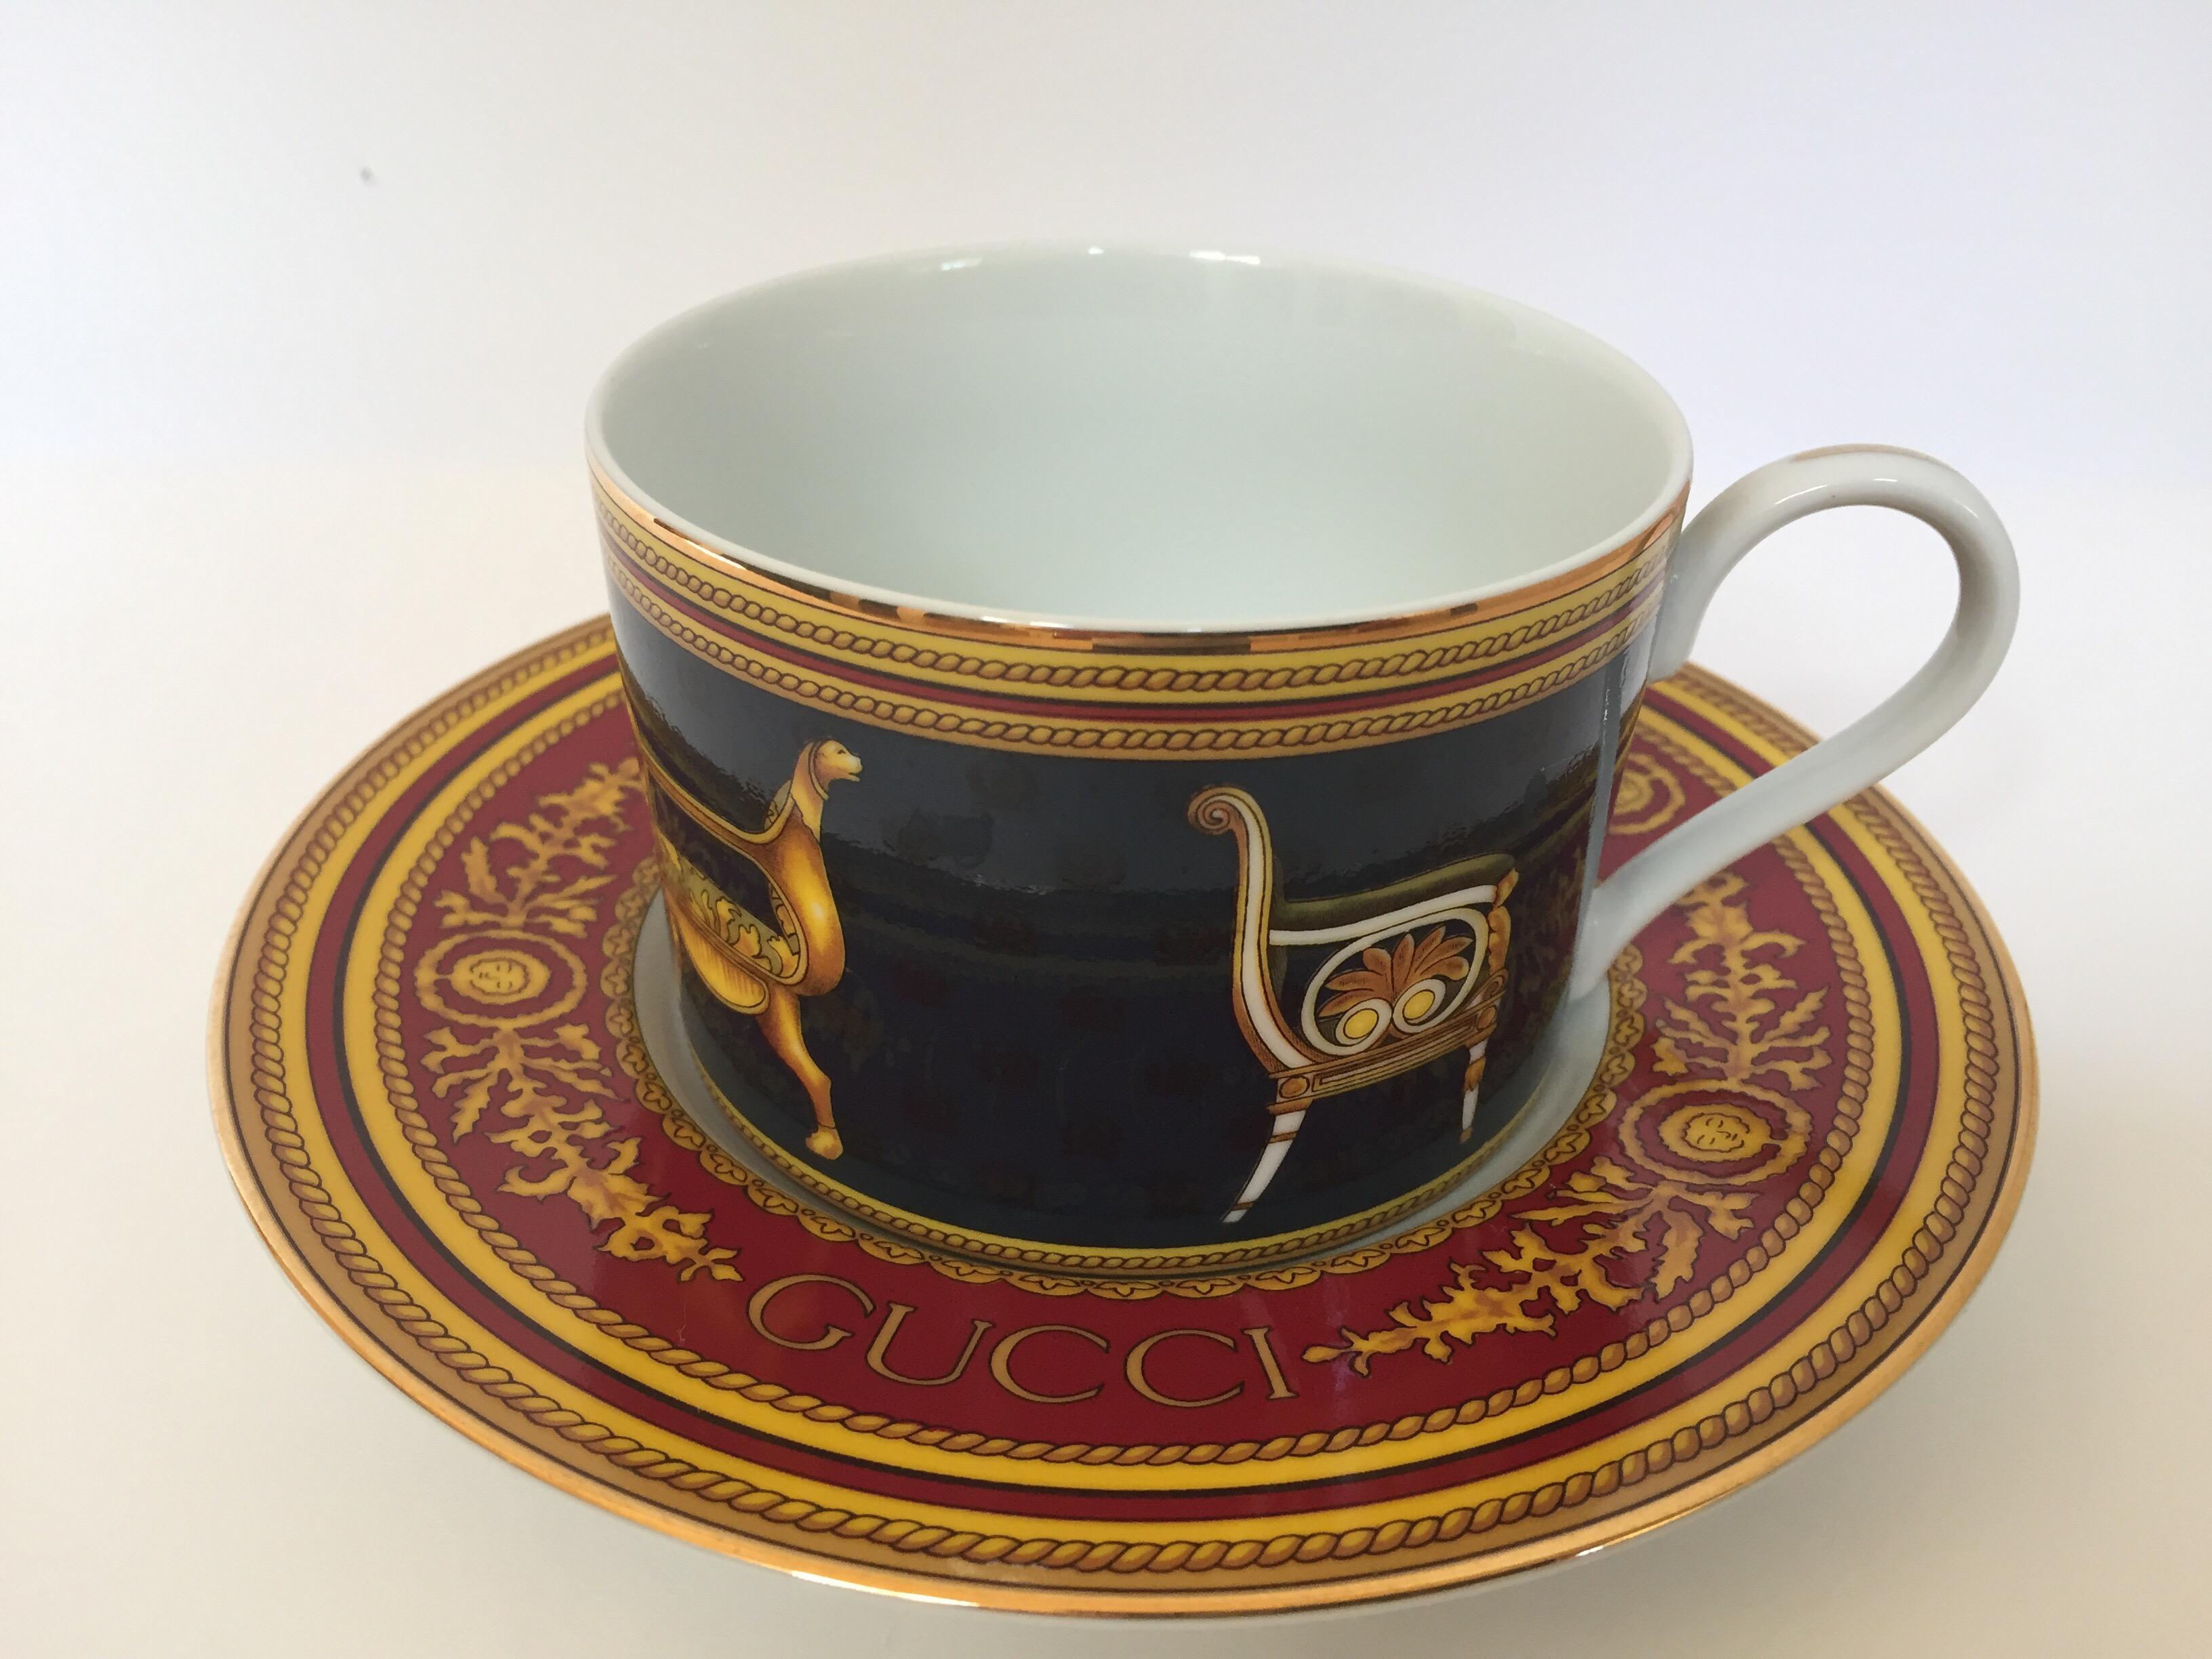 Enjoy the start to your day with the classical sophistication only from Gucci.
Set of two Gucci original porcelain coffee or tea cups and saucers, service for two.
These stylish cups and saucers are crafted of fine porcelain and feature design